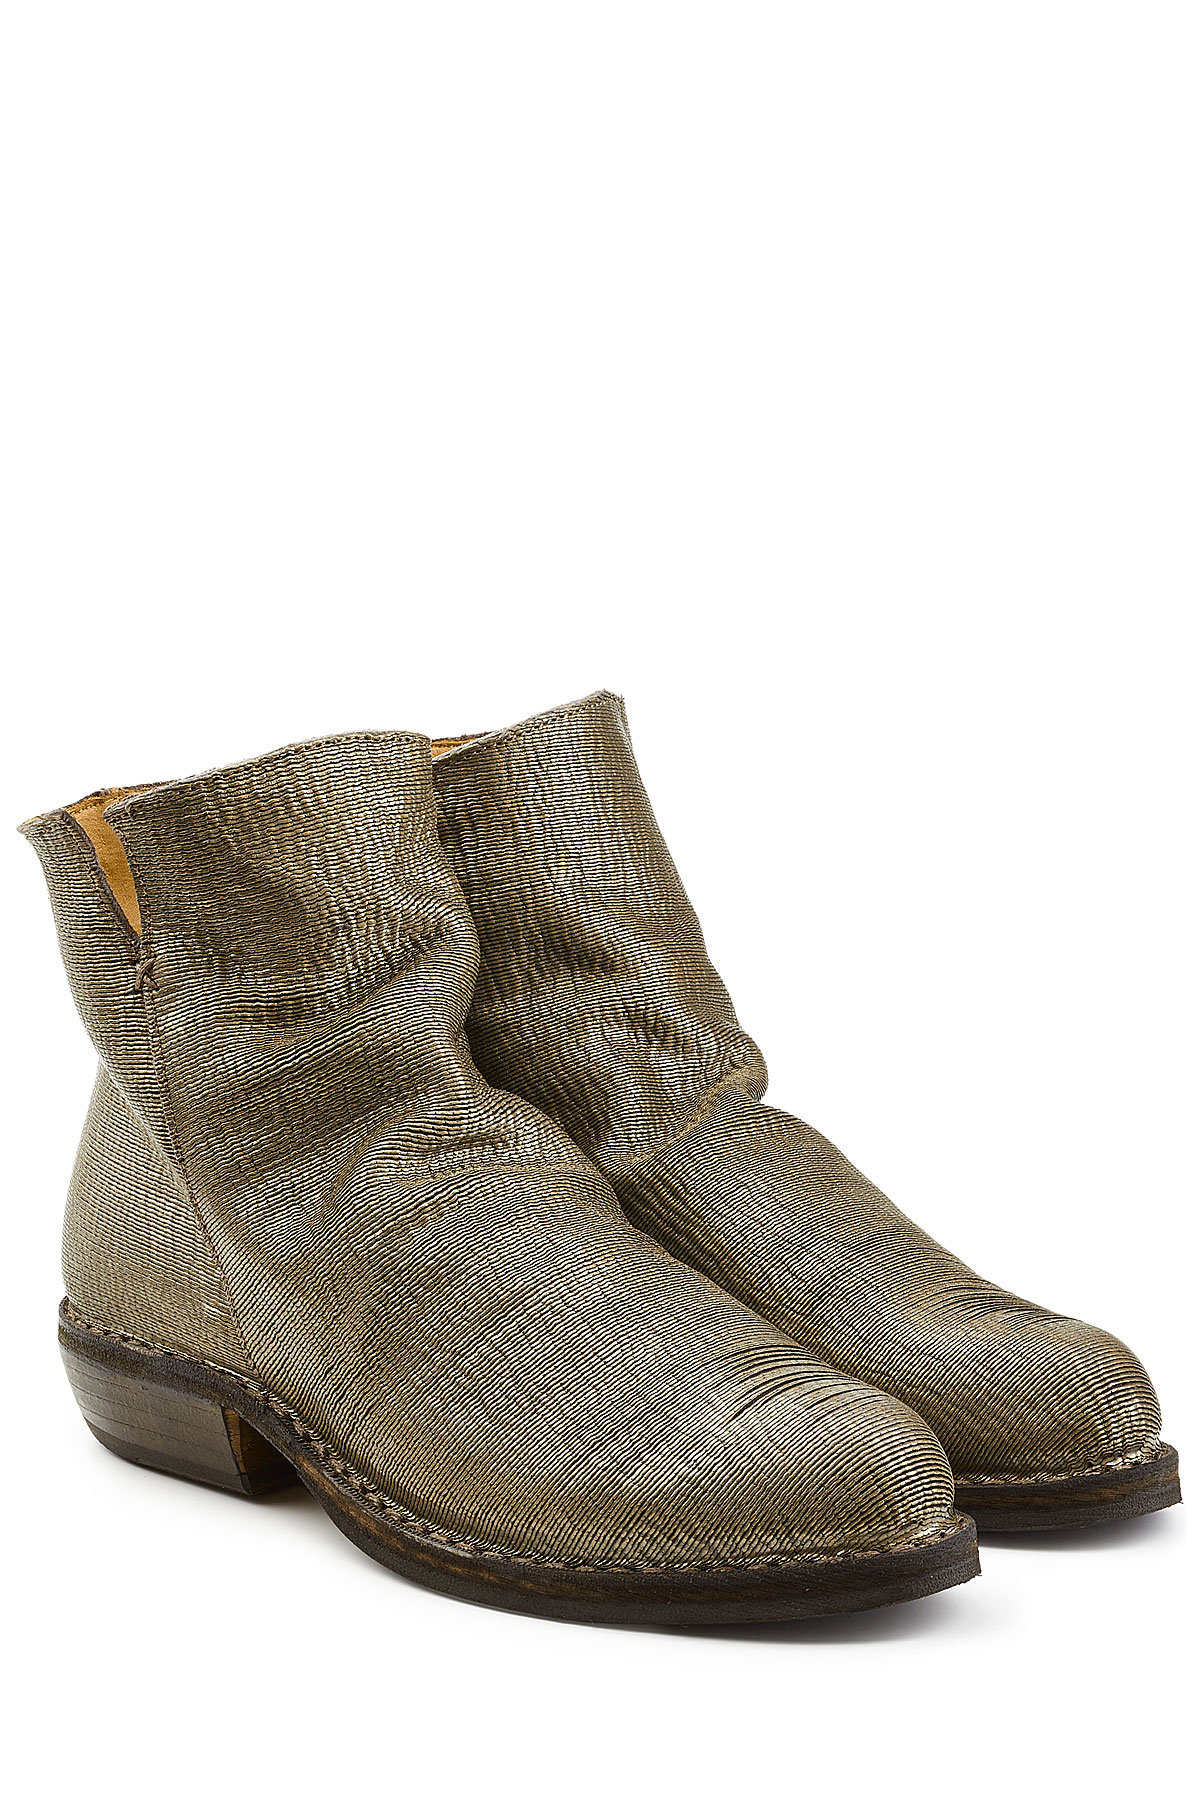 Fiorentini + Baker - Textured Leather Ankle Boots